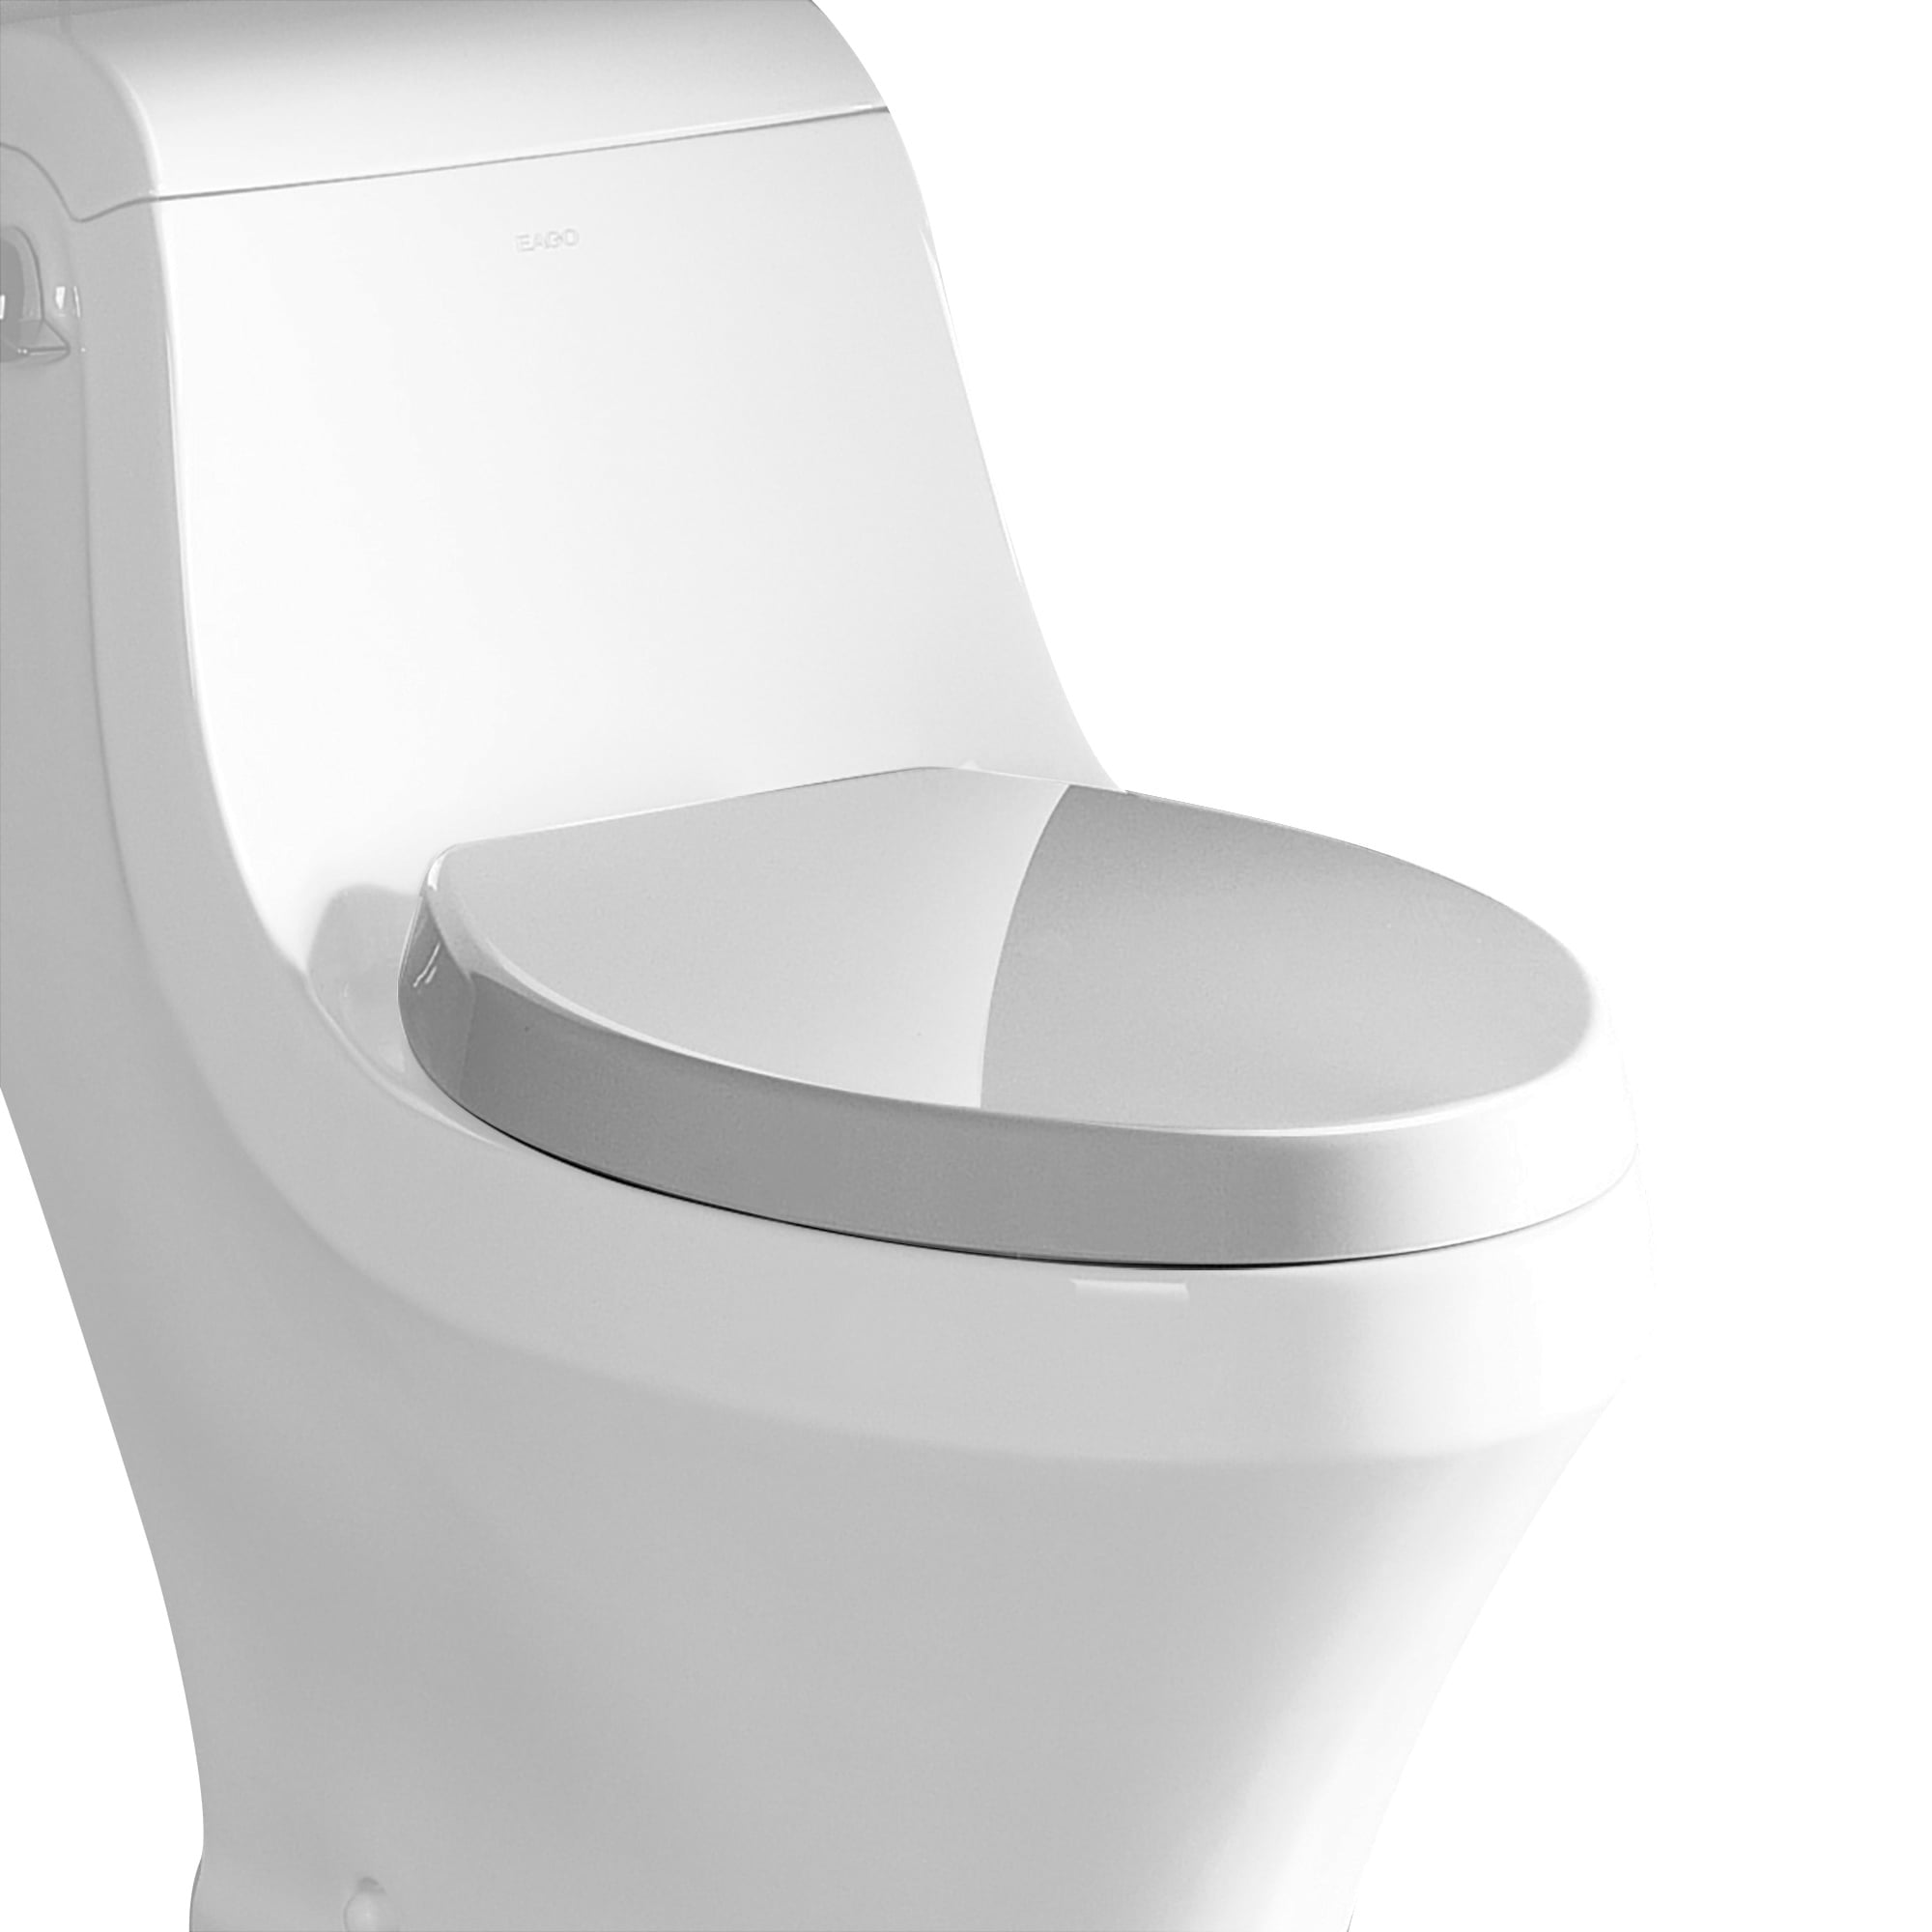 R-133seat Replacement Soft Closing Plastic Toilet Seat, White For Tb133